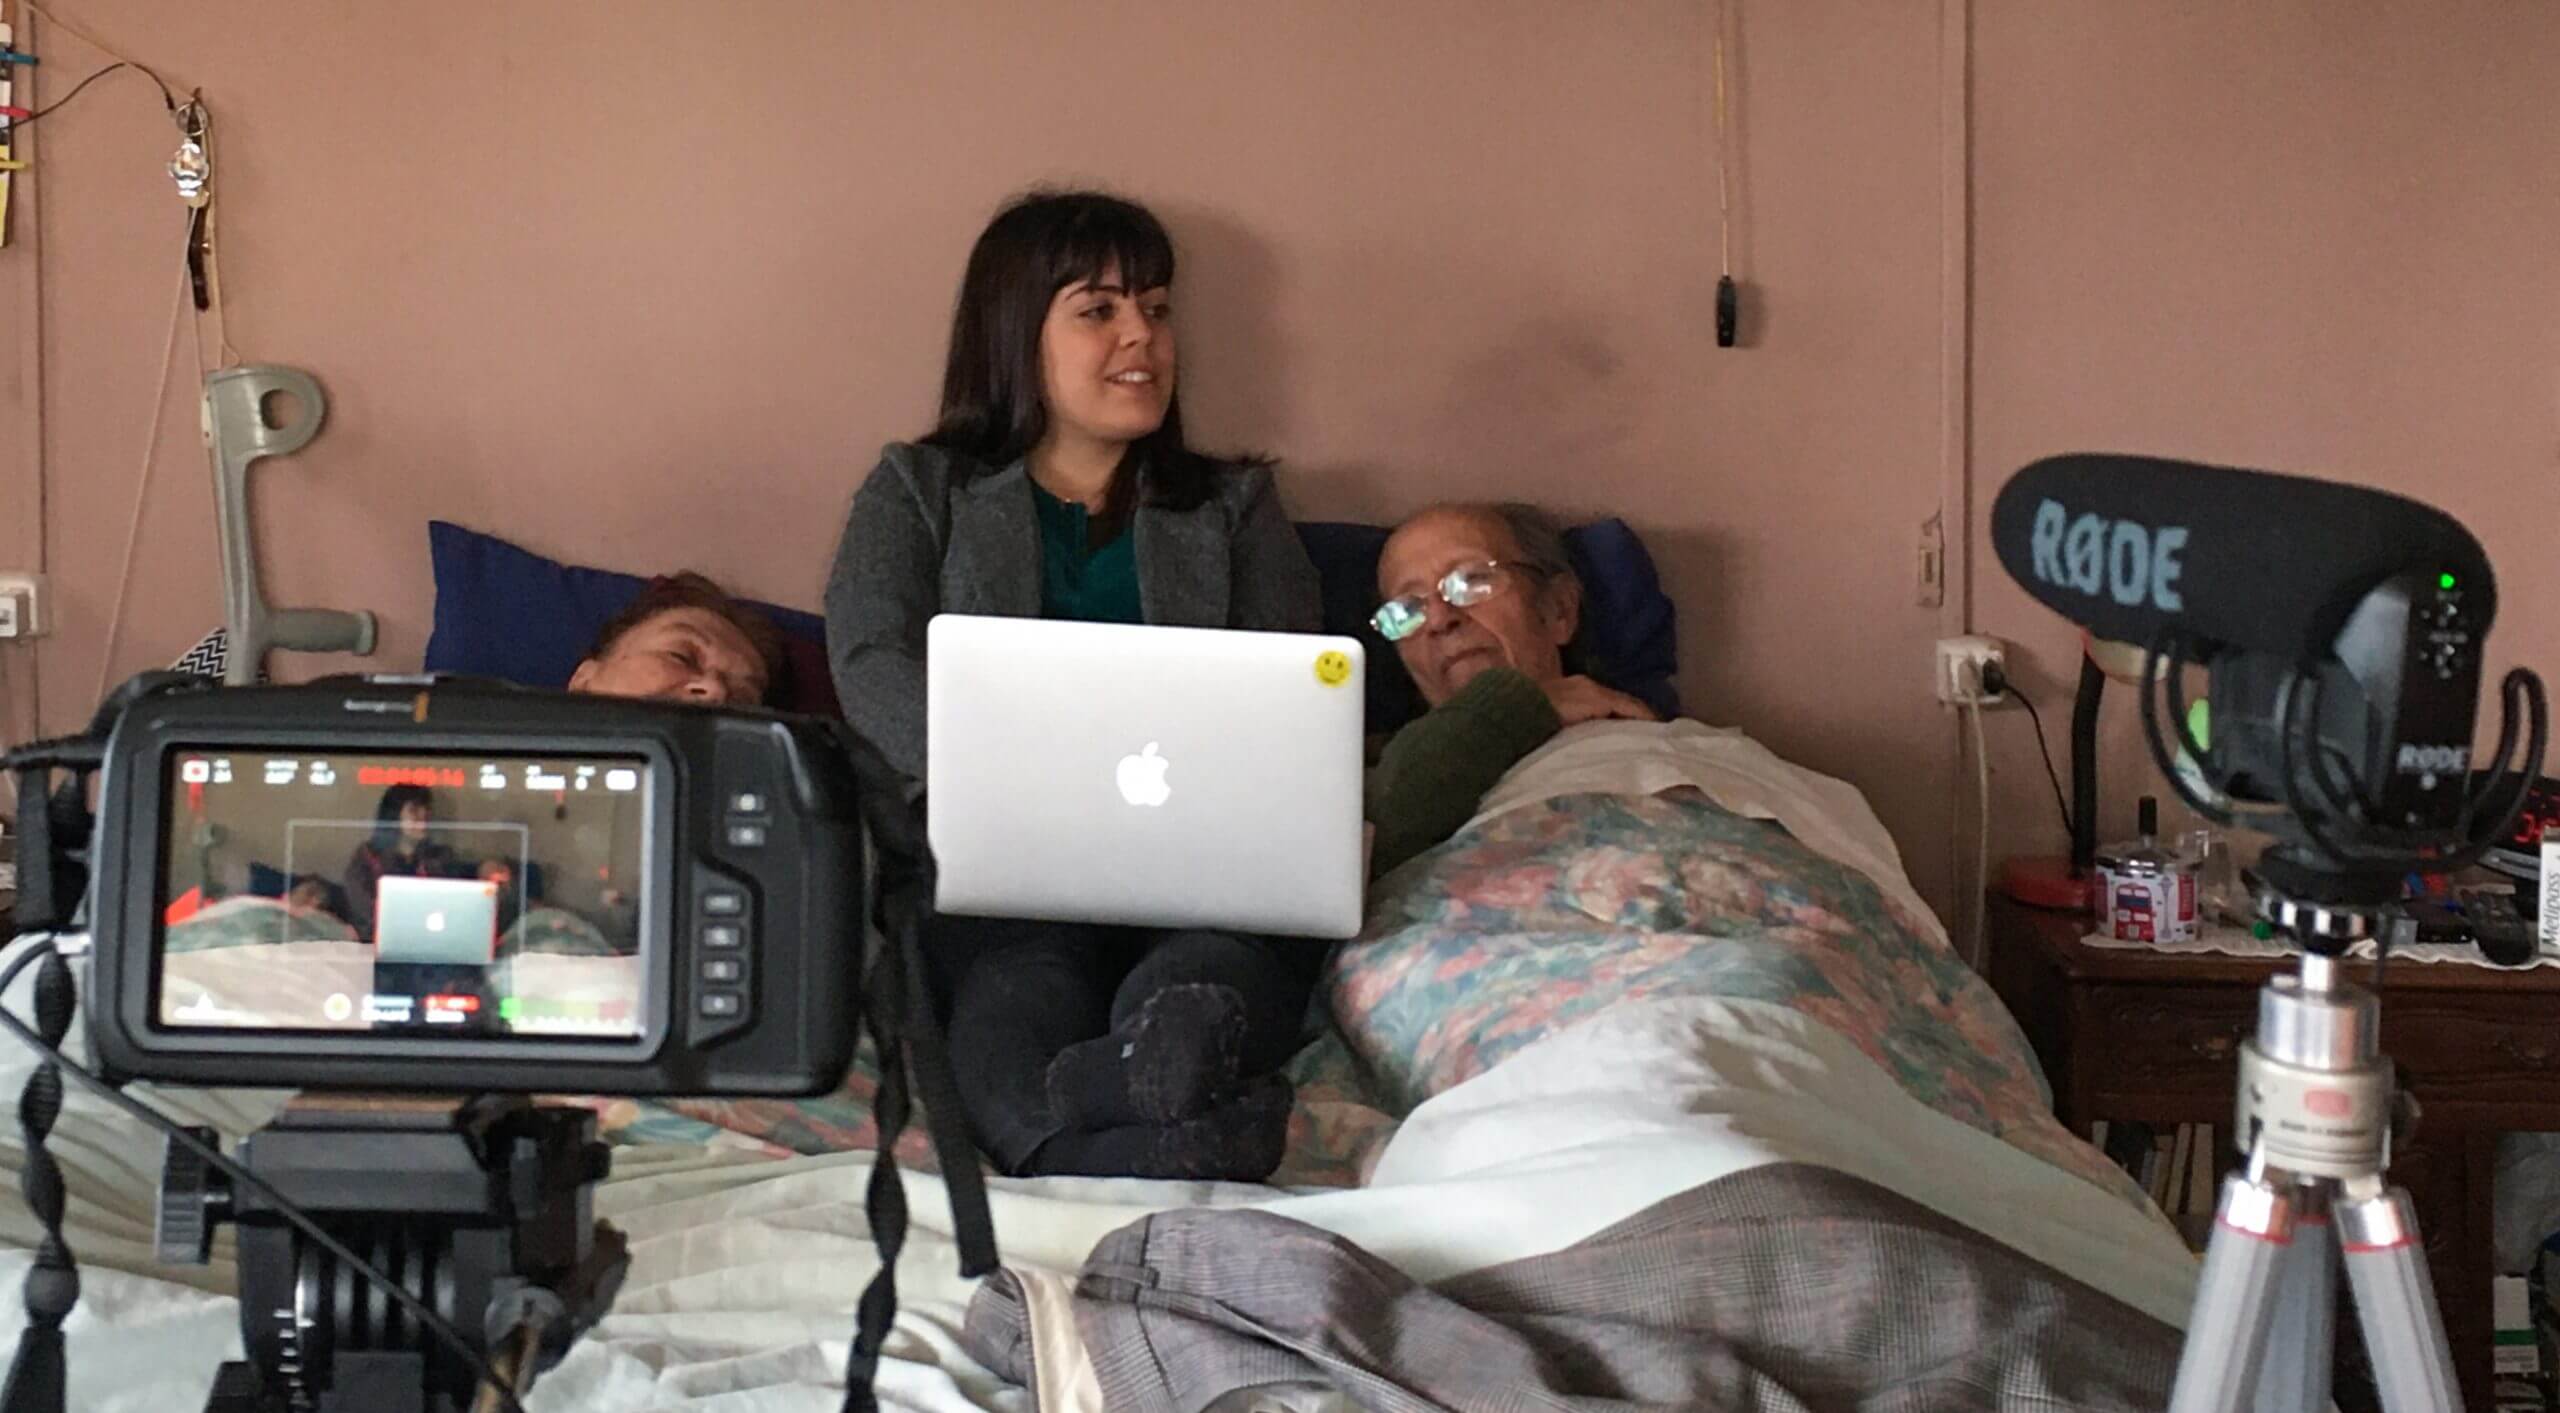 Director Gabriela Pena and her grandparents being filmed while lying in bed.